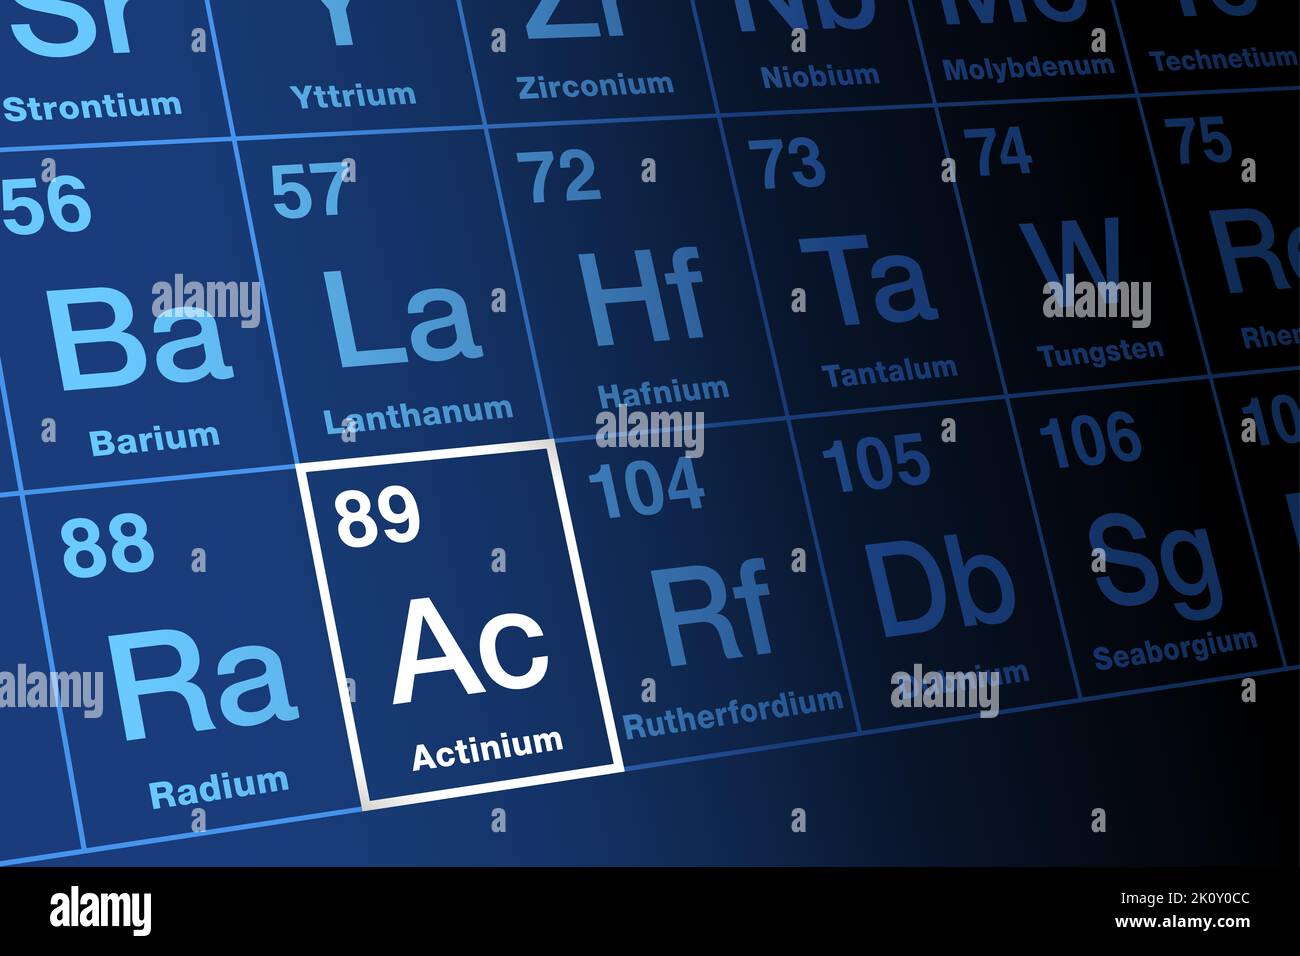 Actinium, on the periodic table. Radioactive metal, with element symbol Ac and atomic number 89. Name giver of actinide series. Stock Photo